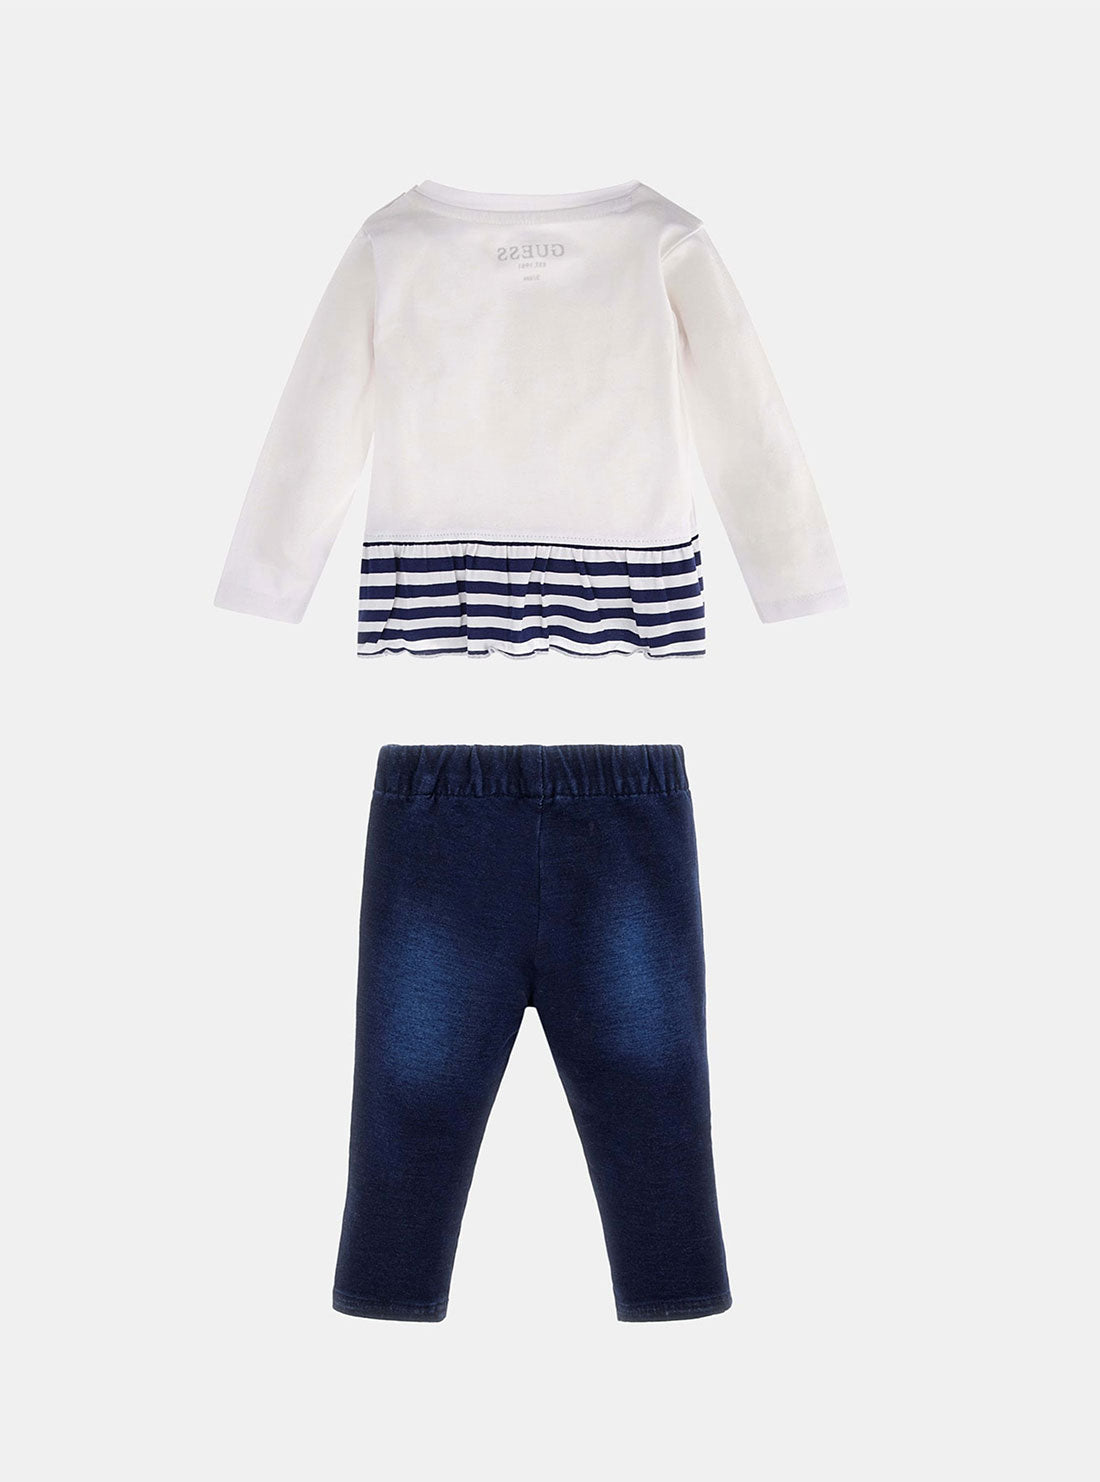 GUESS White Long Sleeve and Denim Leggings Set (3-18M) back view